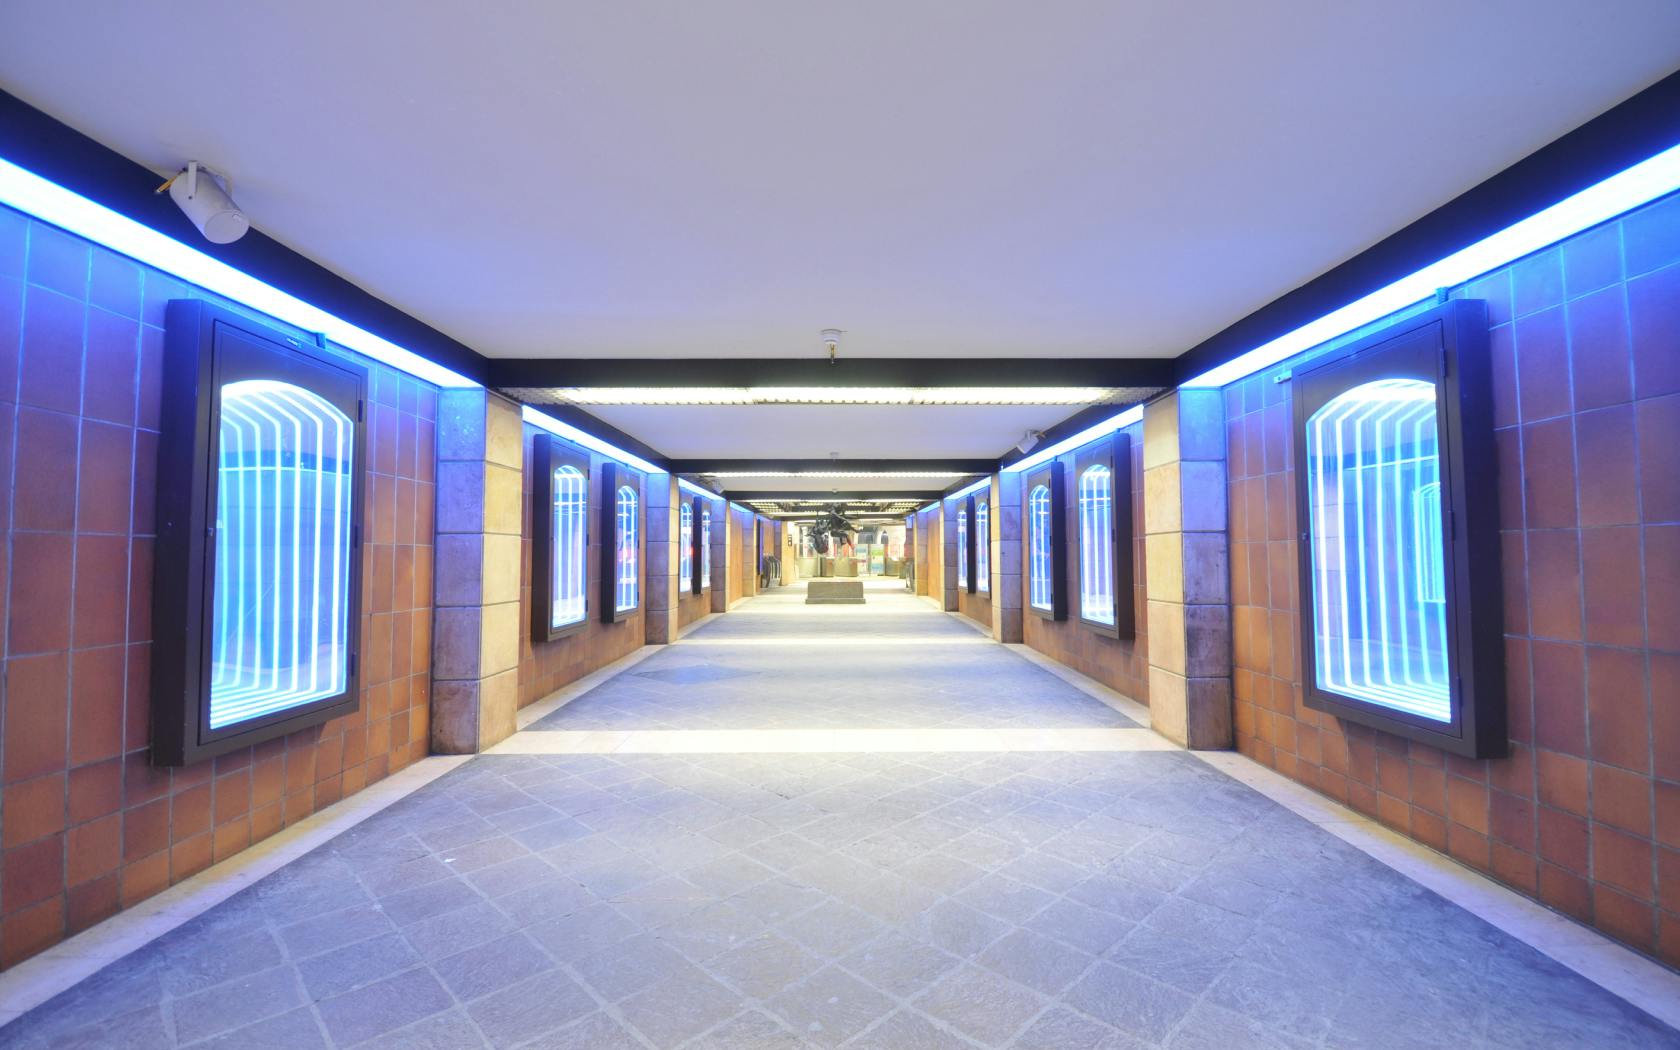 “Infinite mirrors” create a colorful, playful vibe at the corridor entrance. The color of the lighting varies depending on the time of day and circadian cycle.